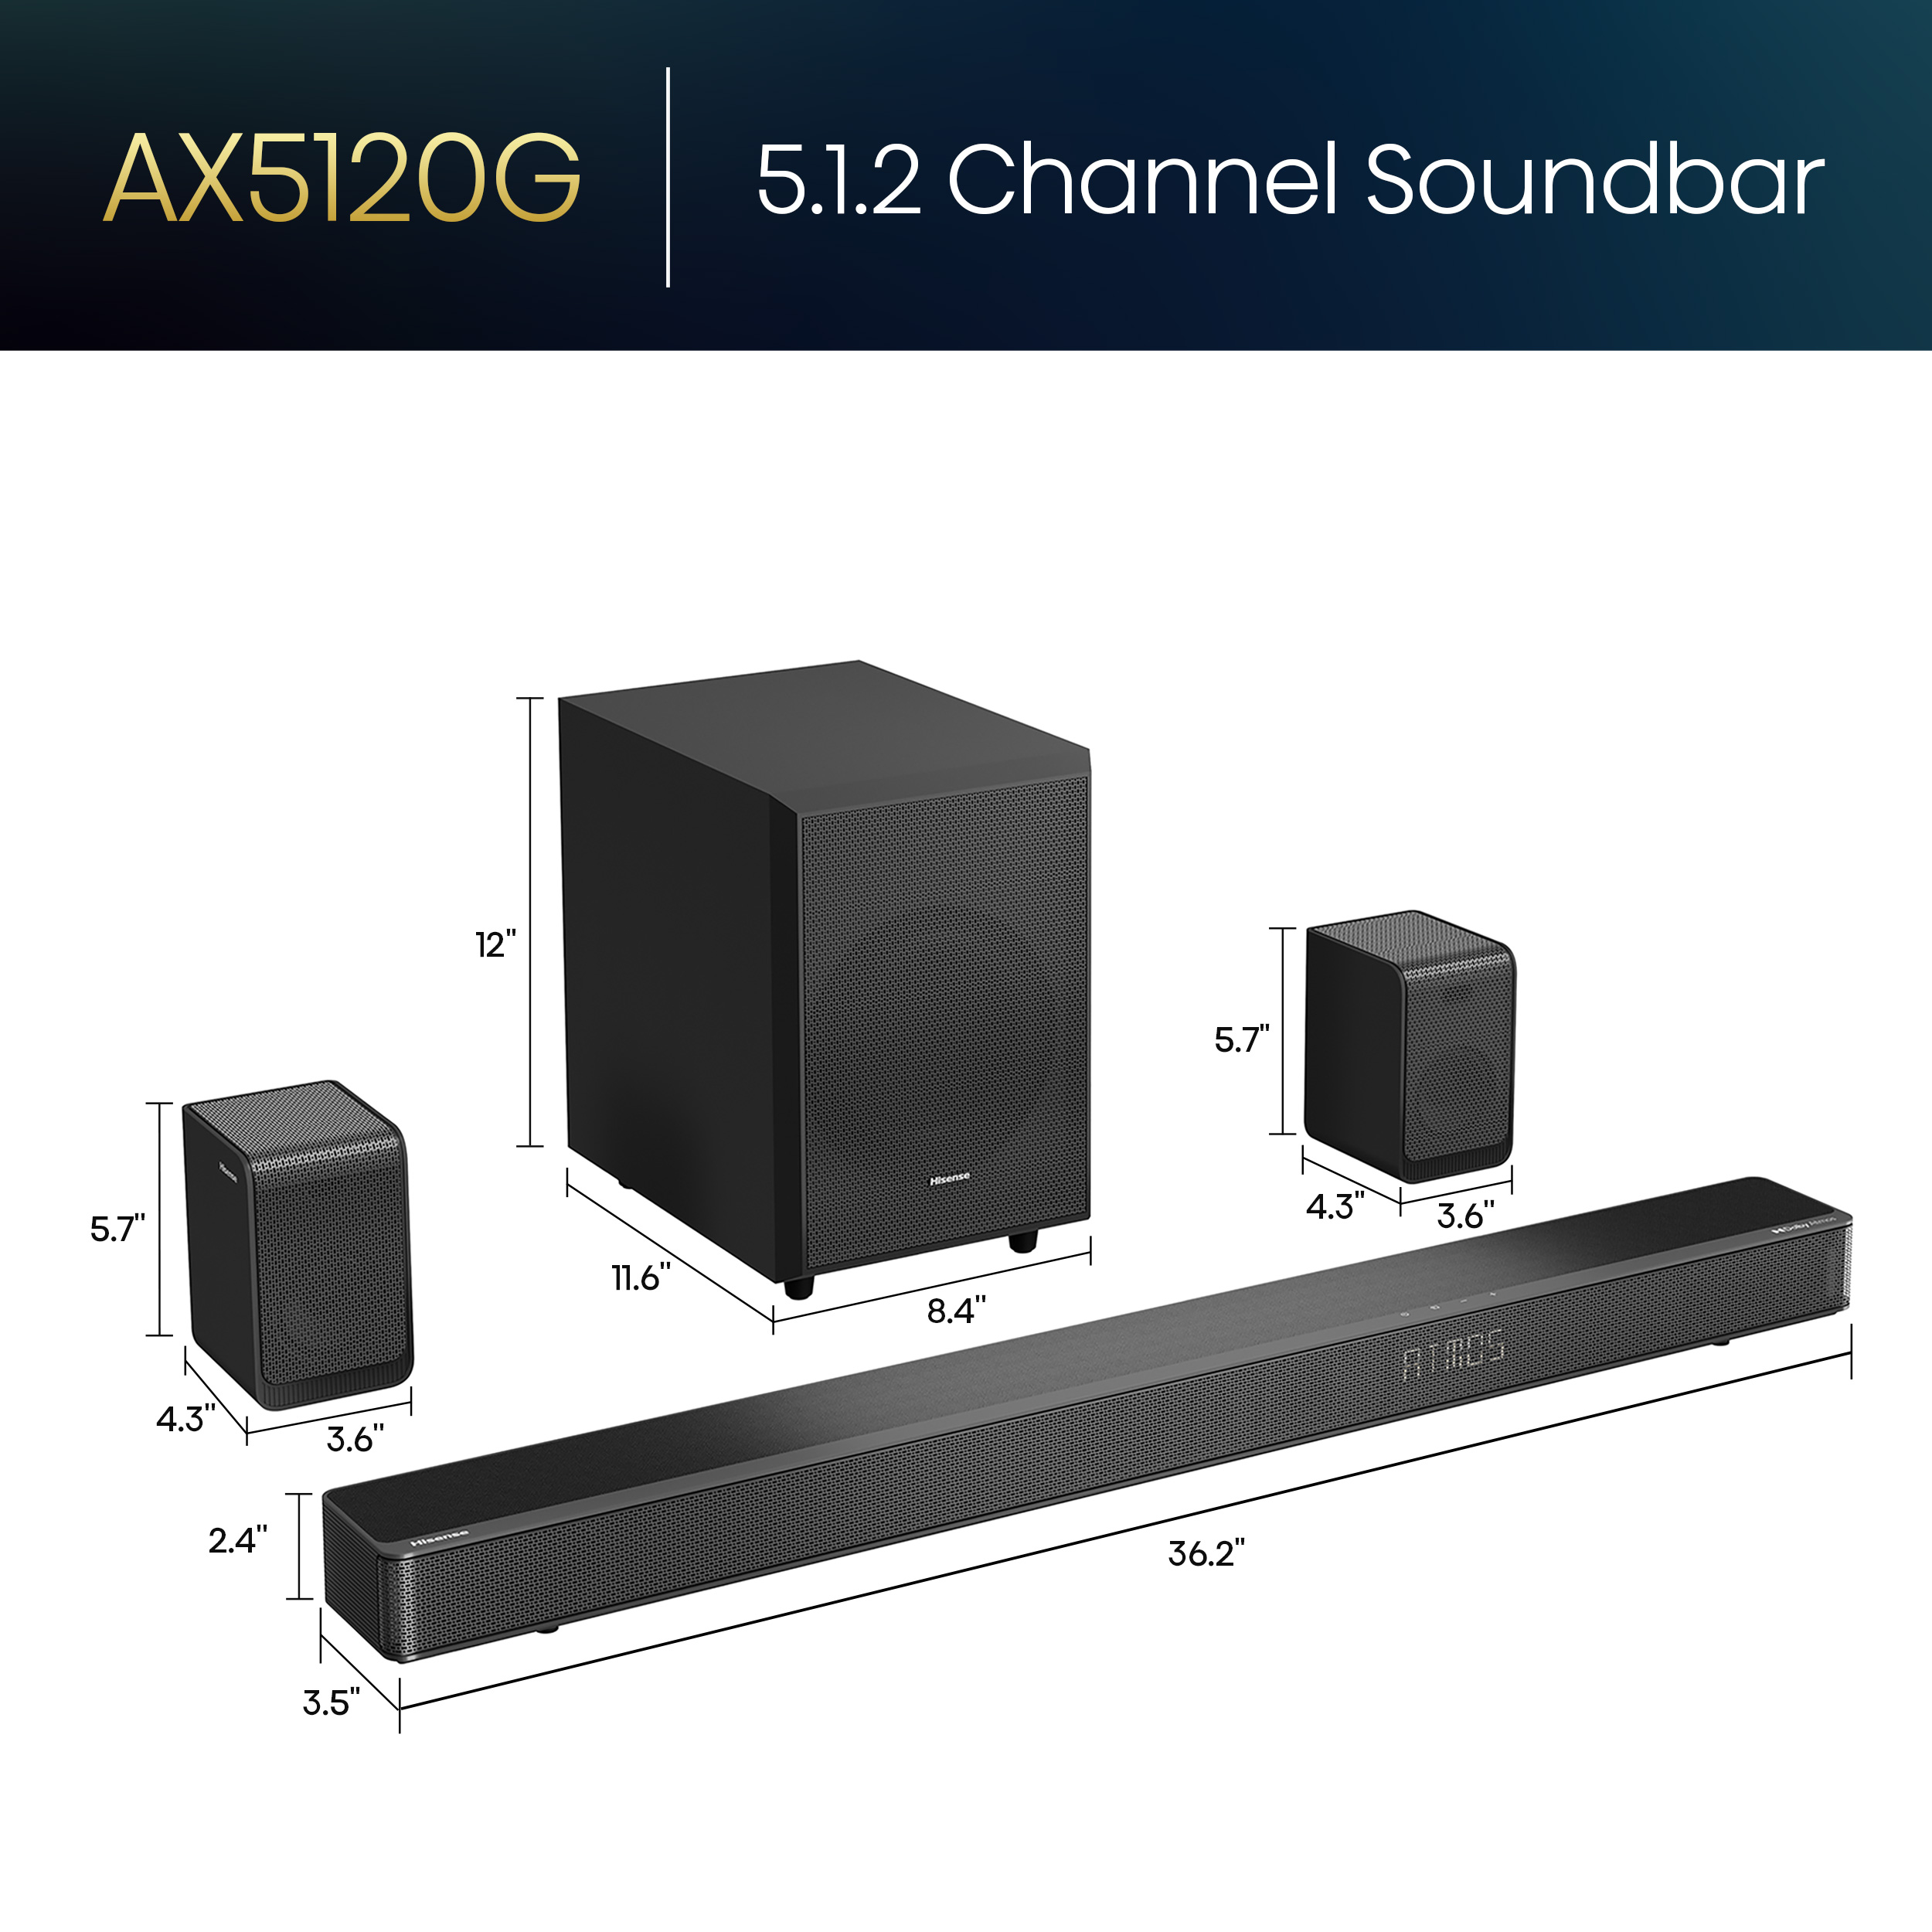 Hisense AX Series 5.1.2 Ch 420W Soundbar with Wireless Subwoofer, Wireless Rear Speakers, and Dolby Atmos (AX5120G, 2023 Model) - image 3 of 16